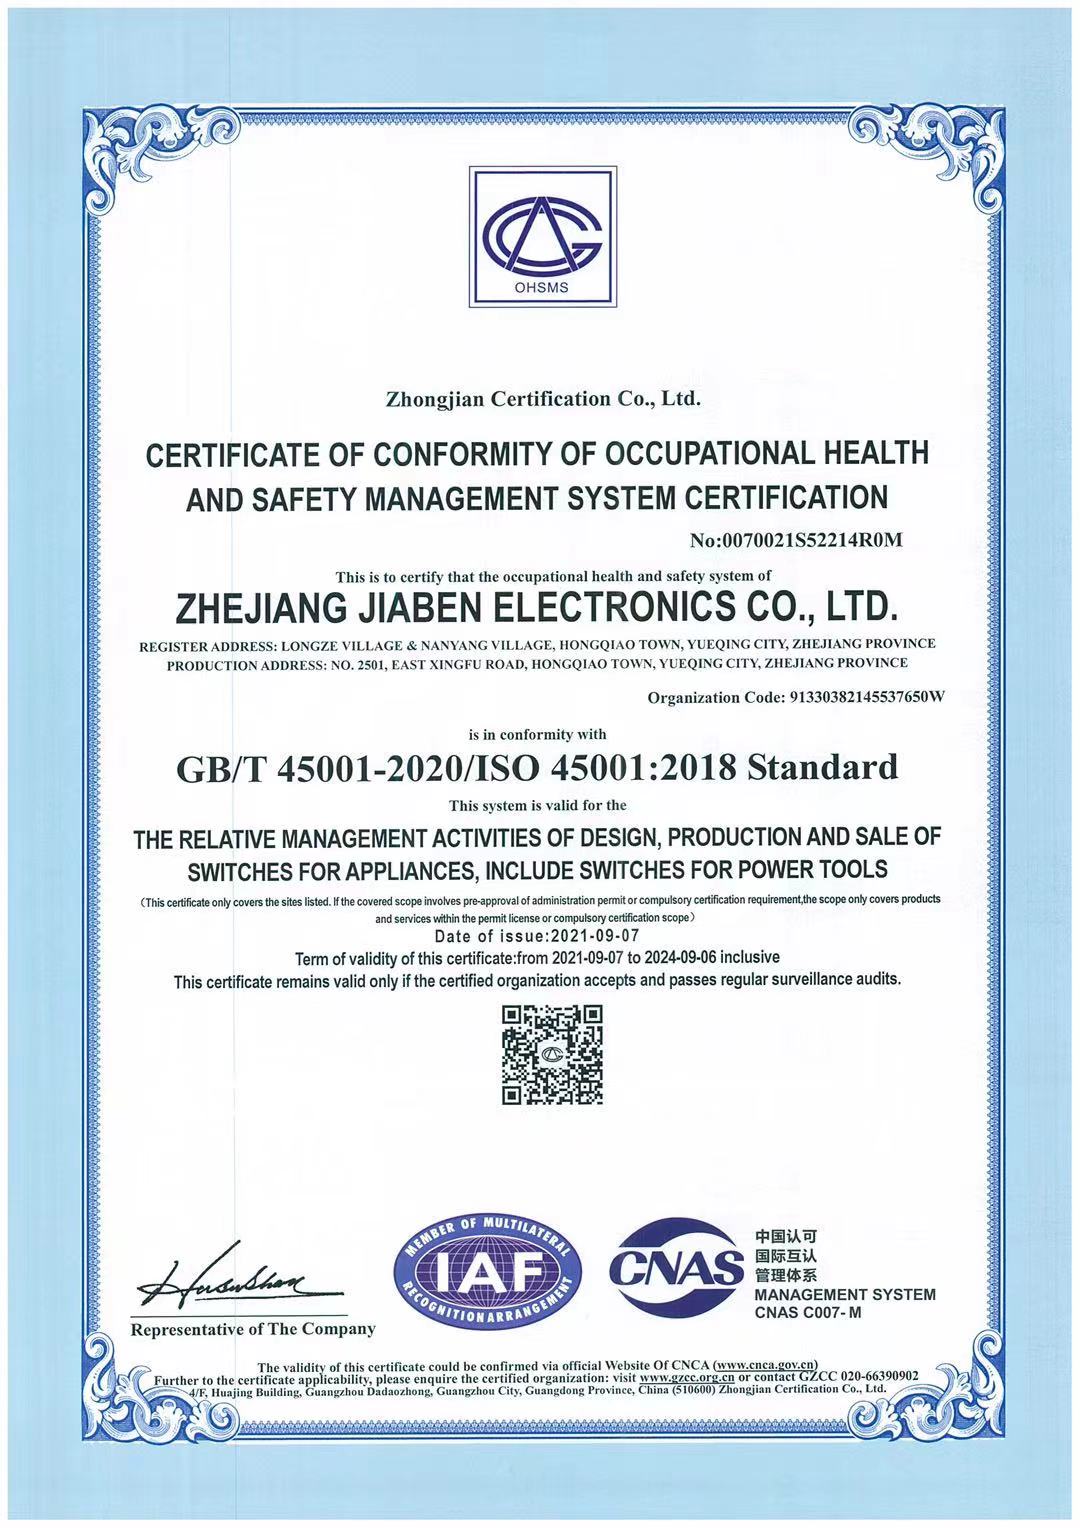 iso45001：2018 occupatonal health and safety managment system certification-jiaben-2021.09.07